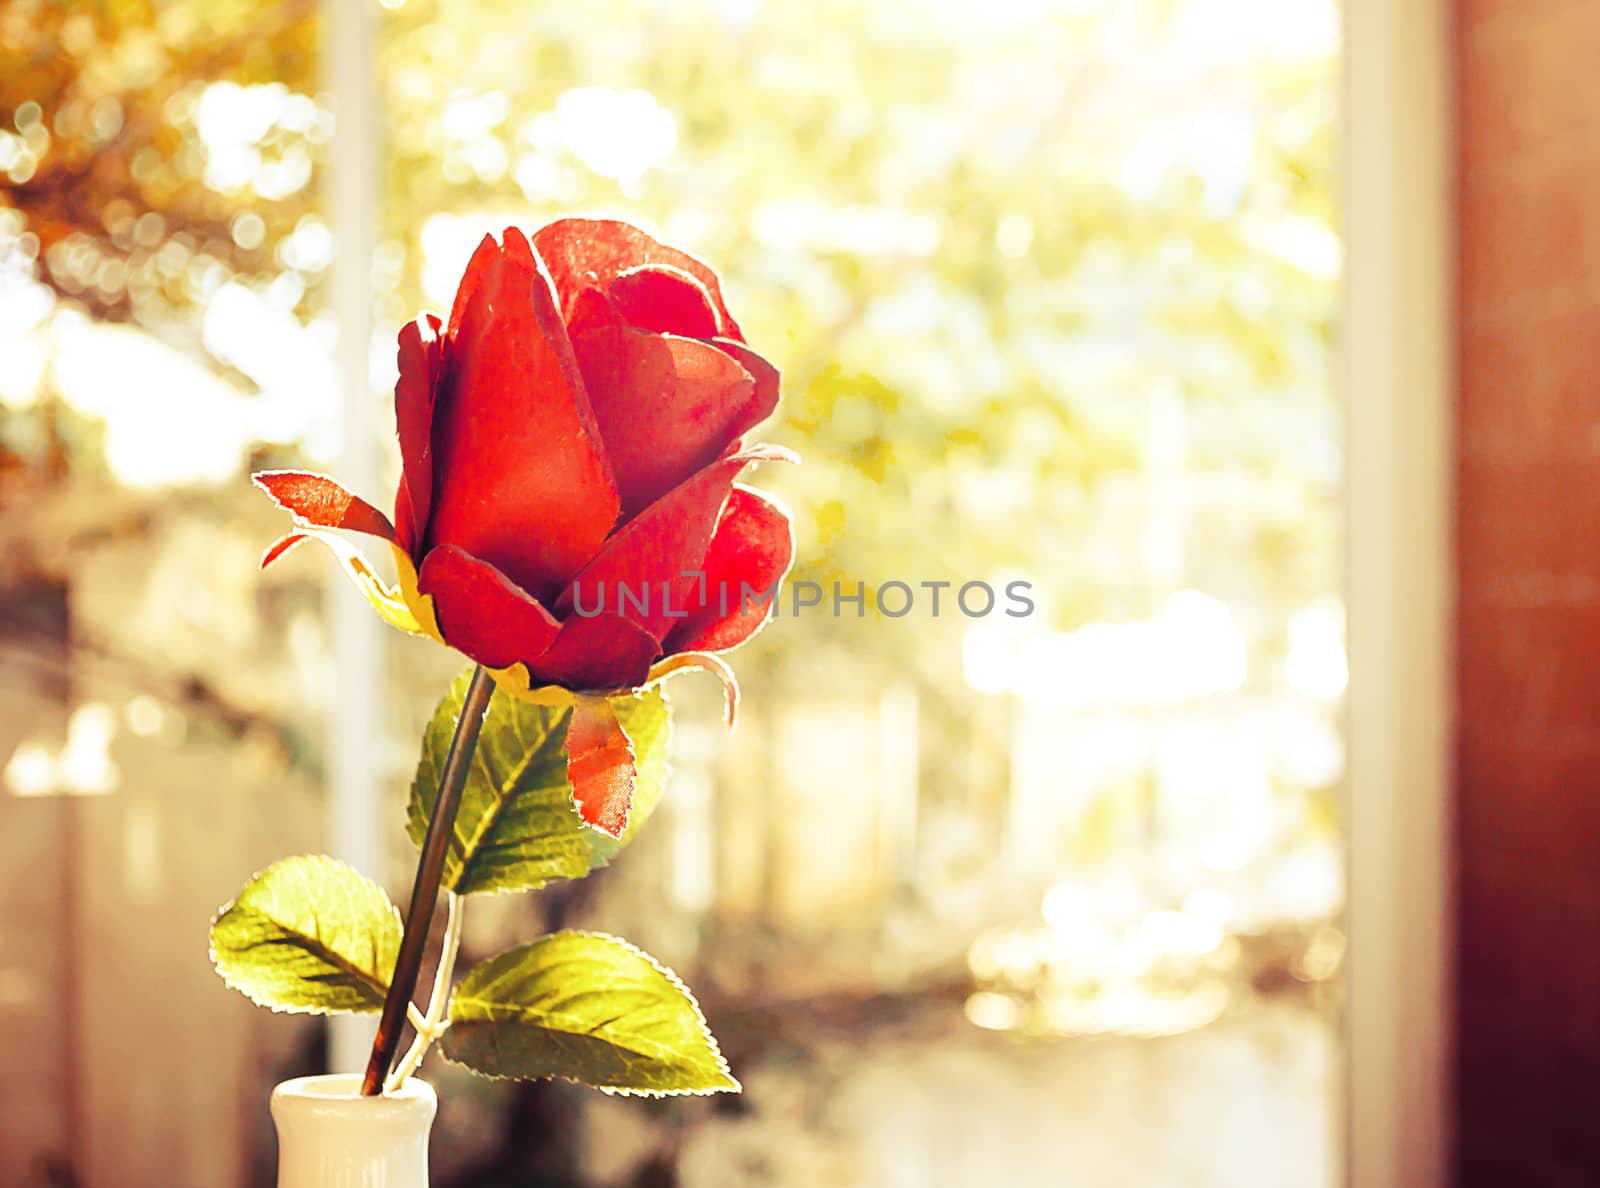 Red roses flower in glass vase by apichart